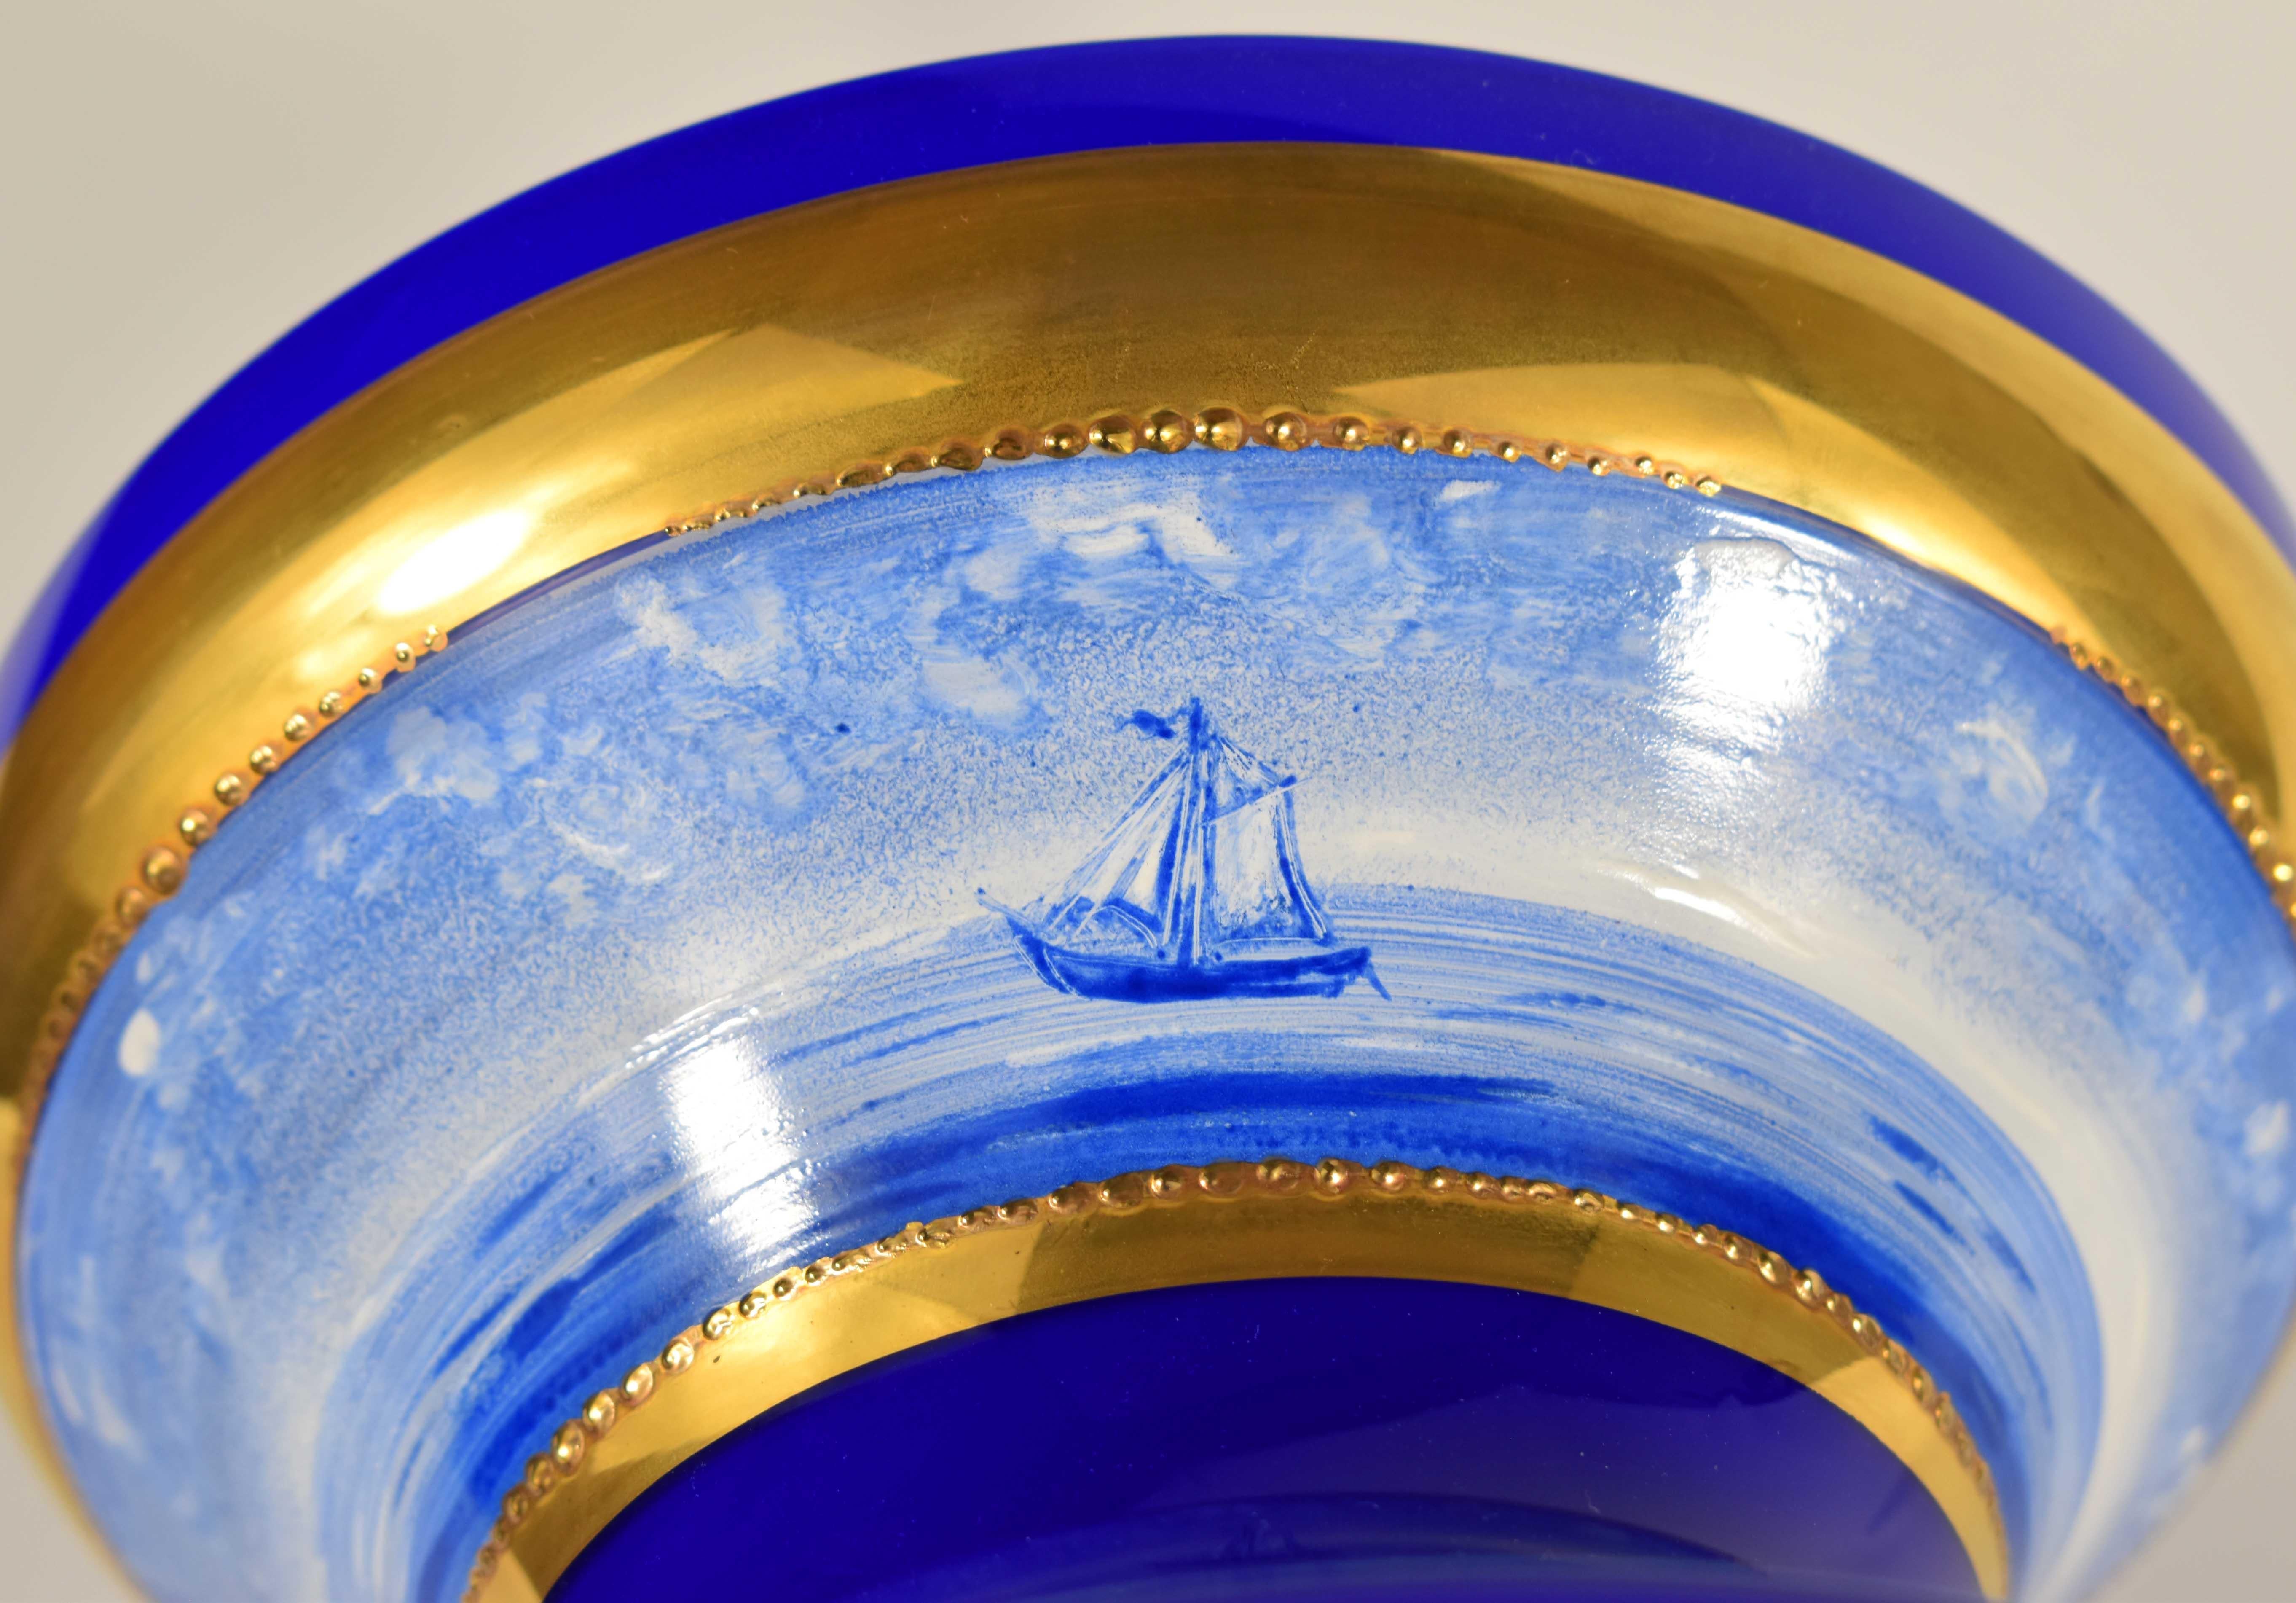 Large Opal Vase Overlay Blue Cobalt Glass, Painted Ships, Gilded, 20th Century For Sale 7